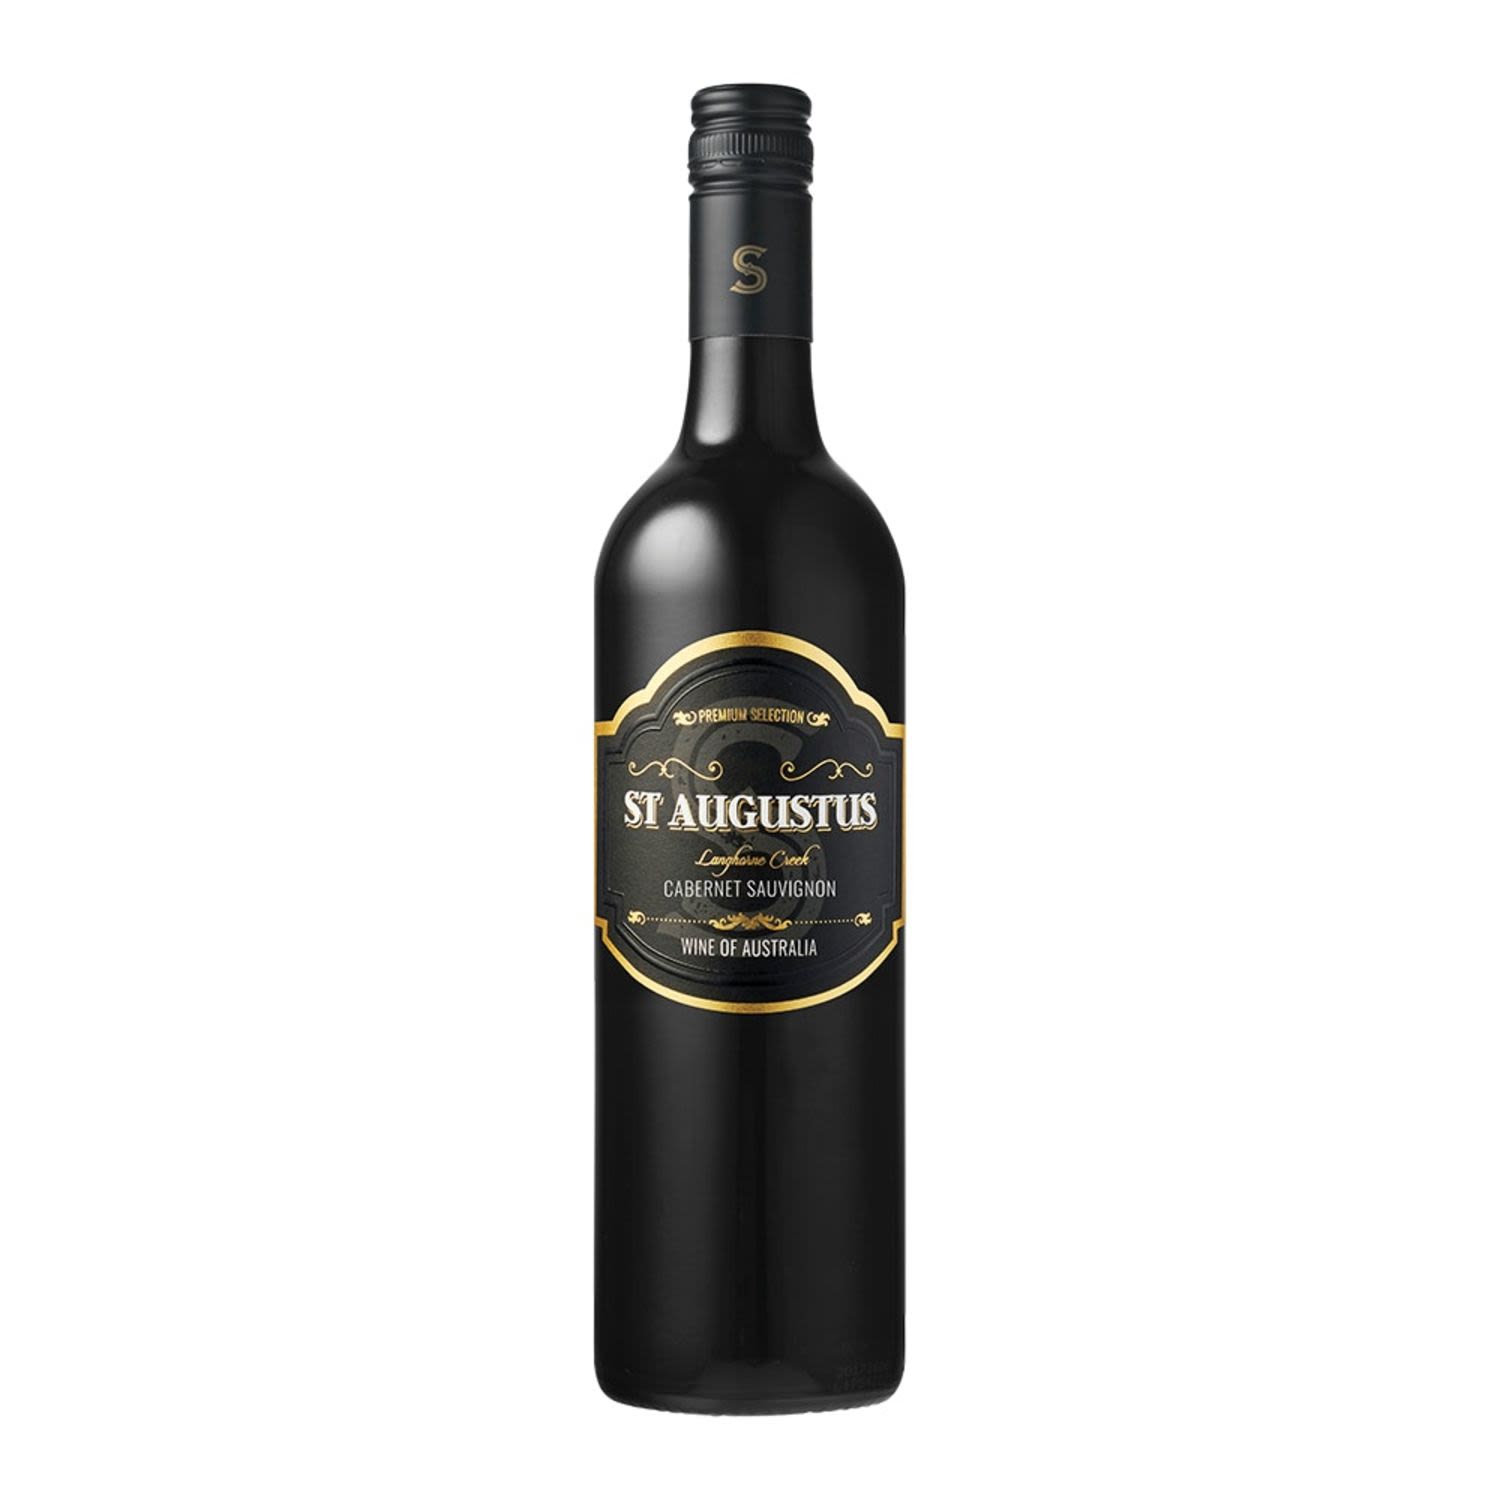 St Augustus Cabernet Sauvignon is a rich and full bodied wine, superb to enjoy now or for many years to come. Ideal with rare lamb and steak, & aged cheeses.<br /> <br />Alcohol Volume: 14.50%<br /><br />Pack Format: Bottle<br /><br />Standard Drinks: 8.6</br /><br />Pack Type: Bottle<br /><br />Country of Origin: Australia<br /><br />Region: Langhorne Creek<br /><br />Vintage: Vintages Vary<br />